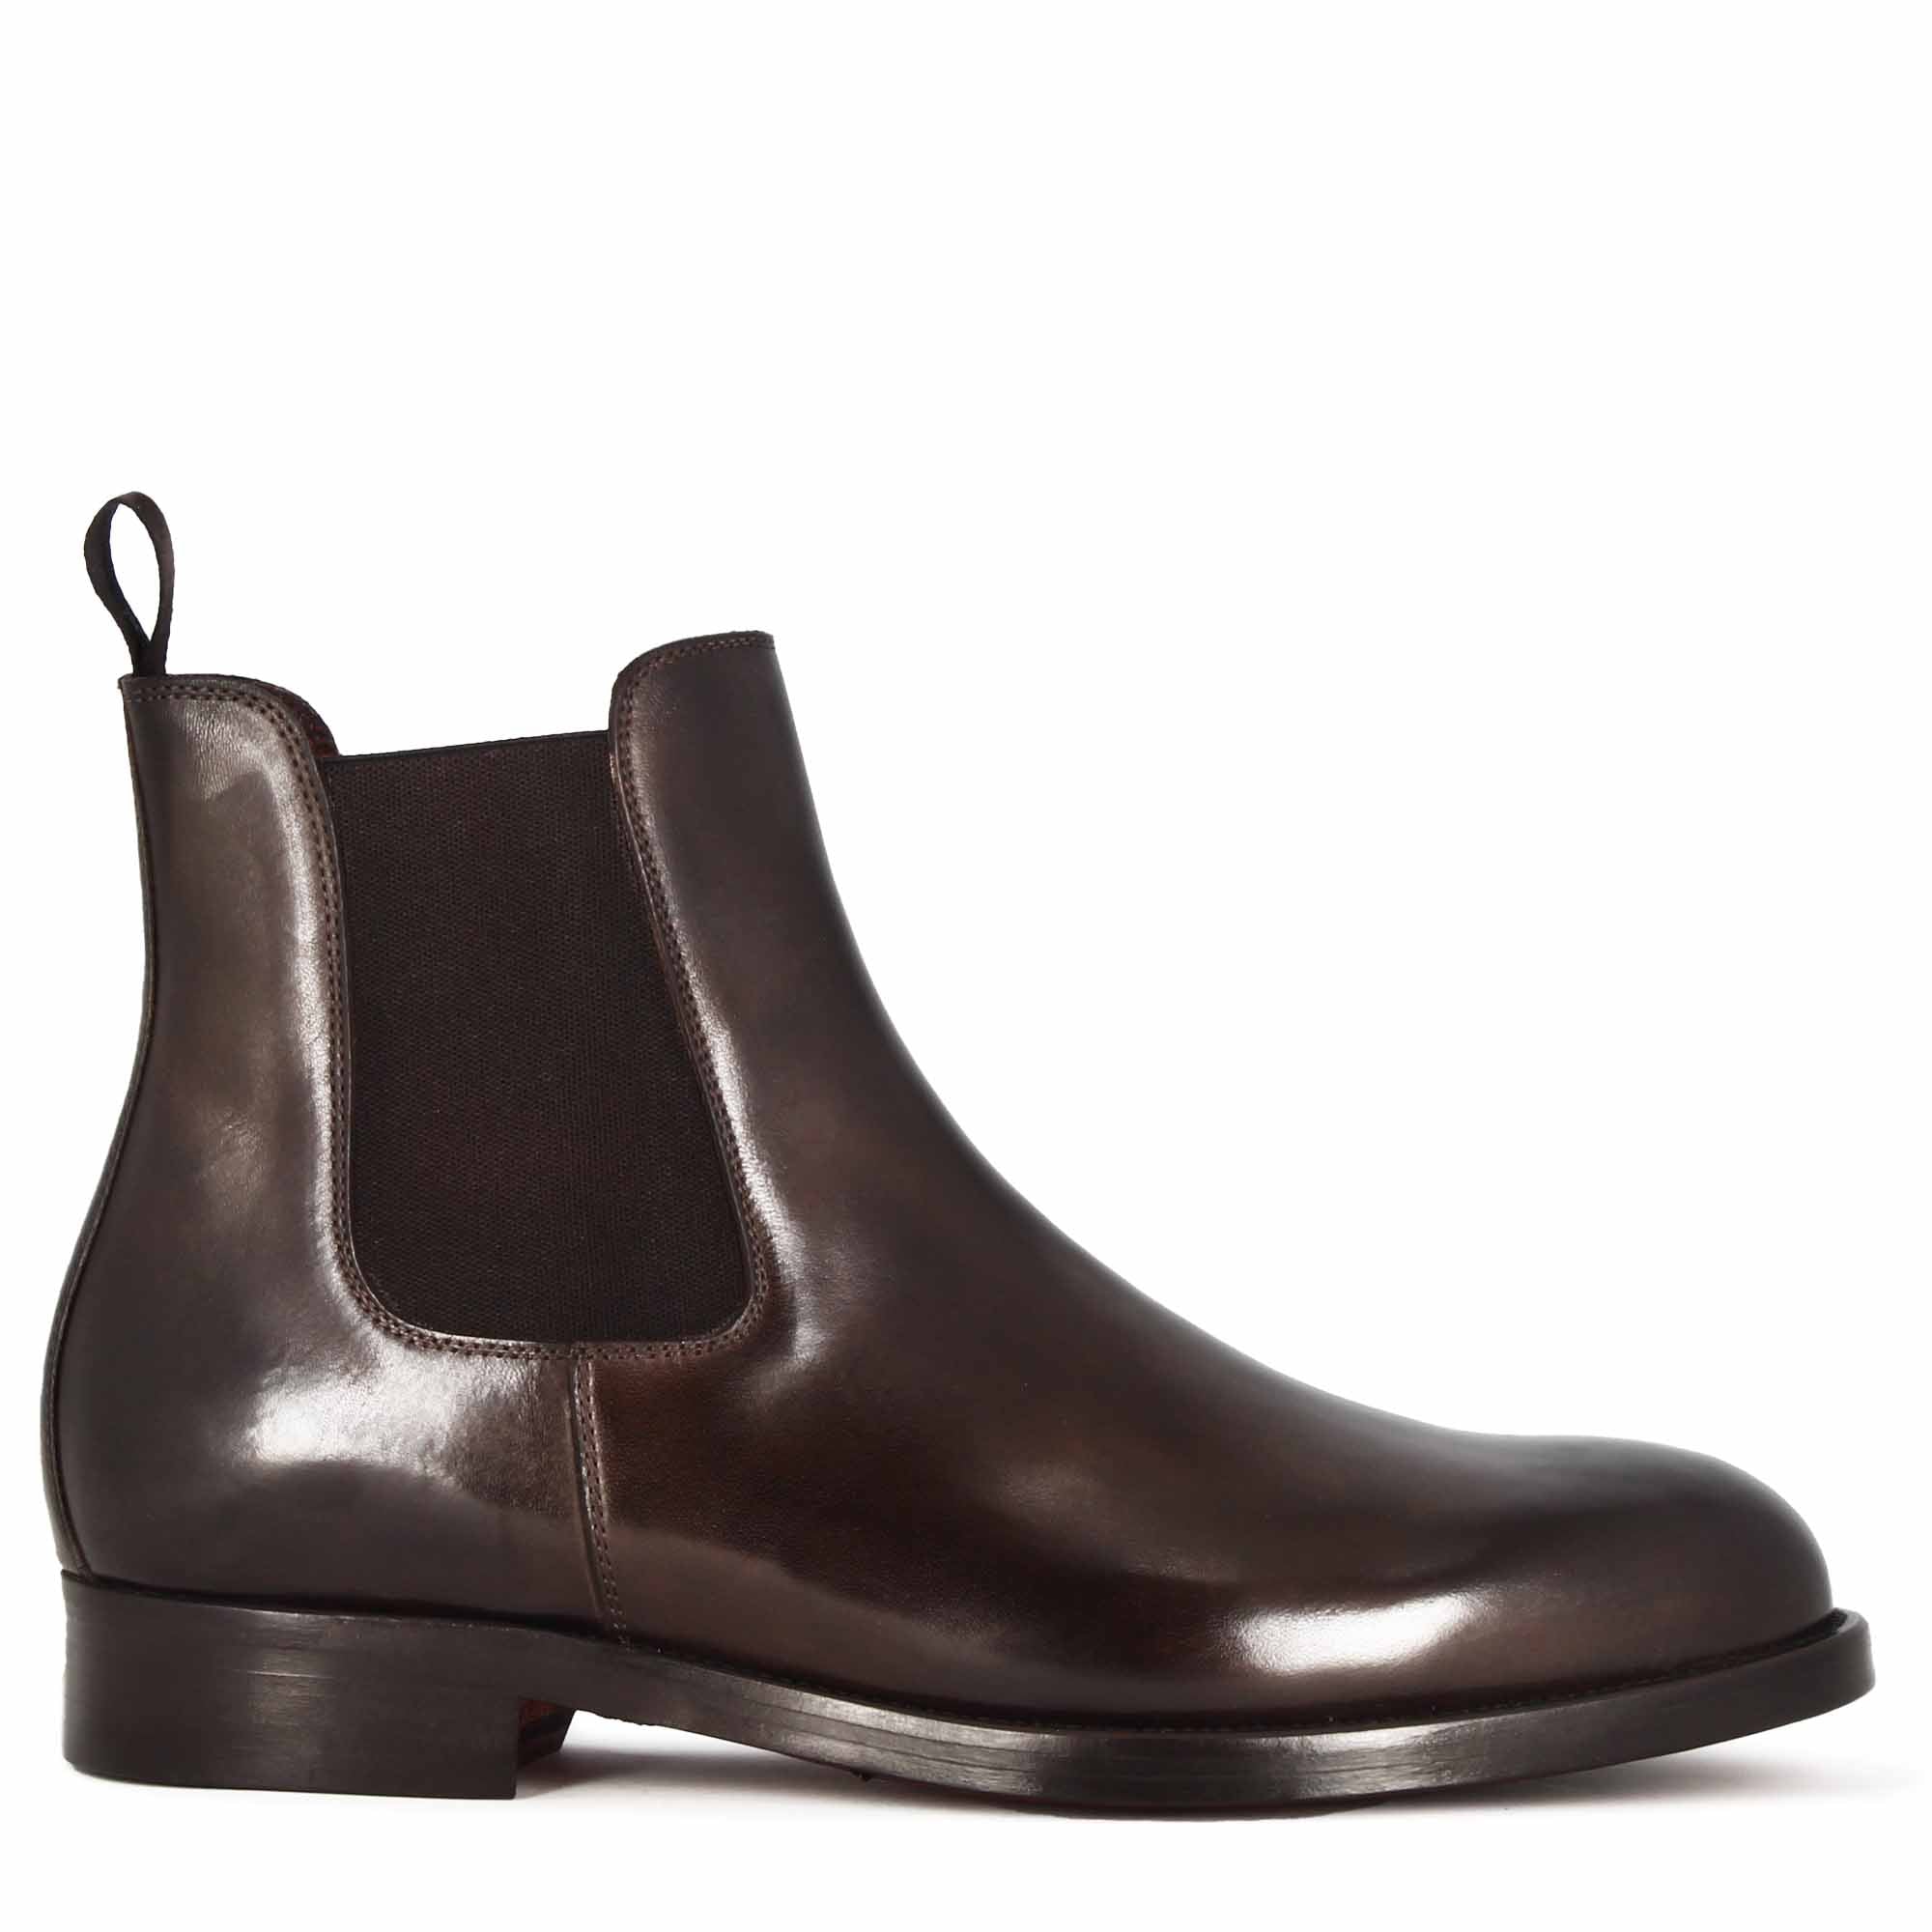 Handmade Brown Leather Chelsea Boots